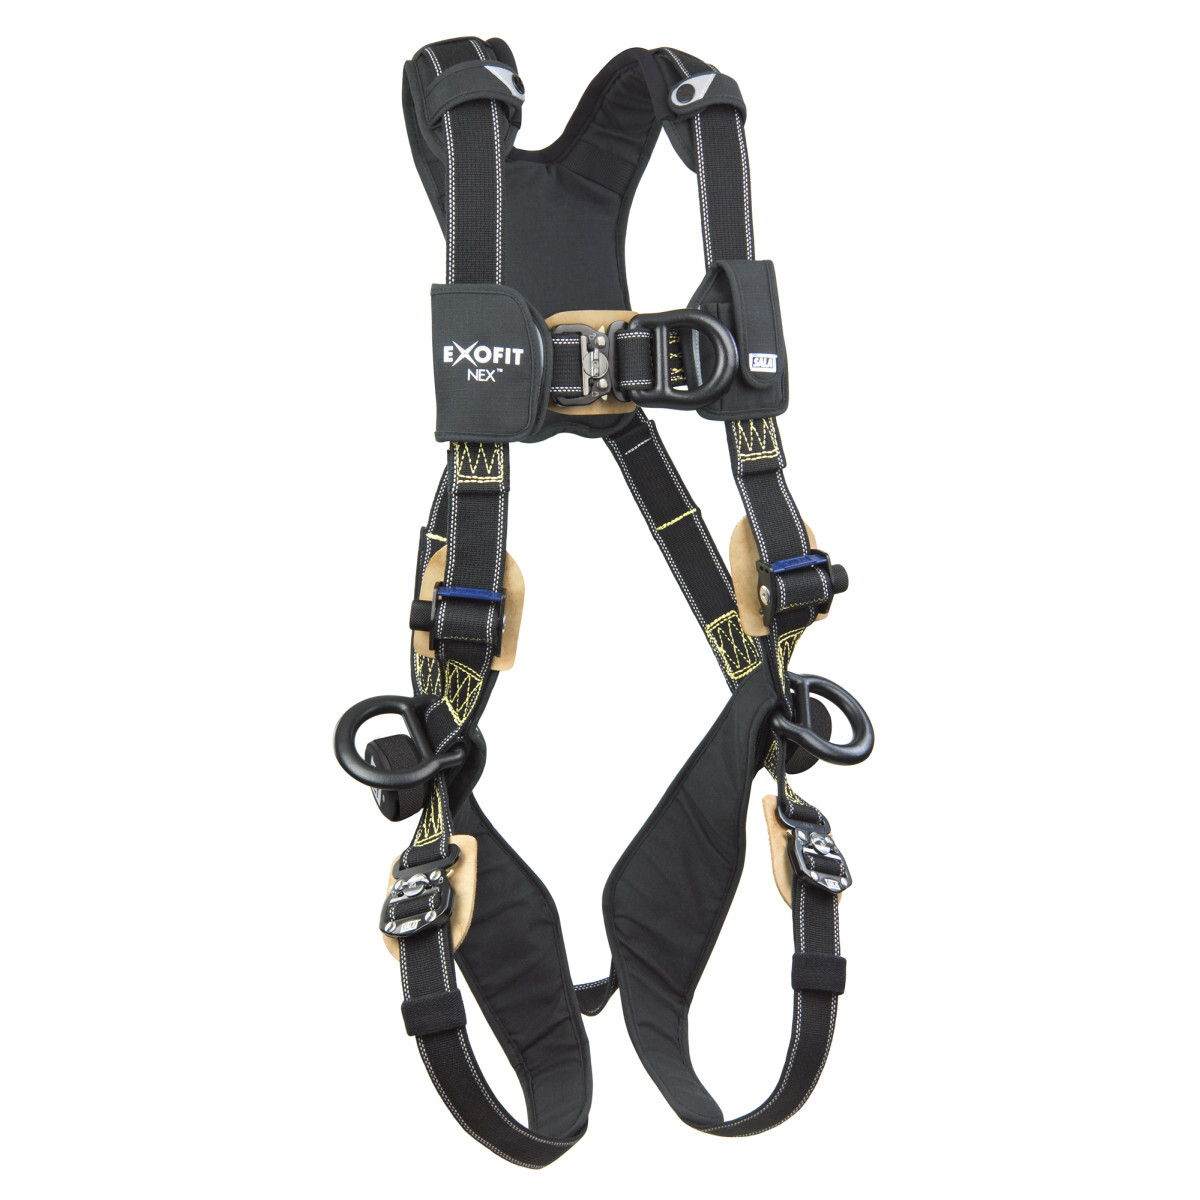 3M™ DBI-SALA® Large ExoFit NEX™ Arc Flash Full Body/Vest Style Harness With Front, Back And Side D-Ring, Locking Quick Connect C